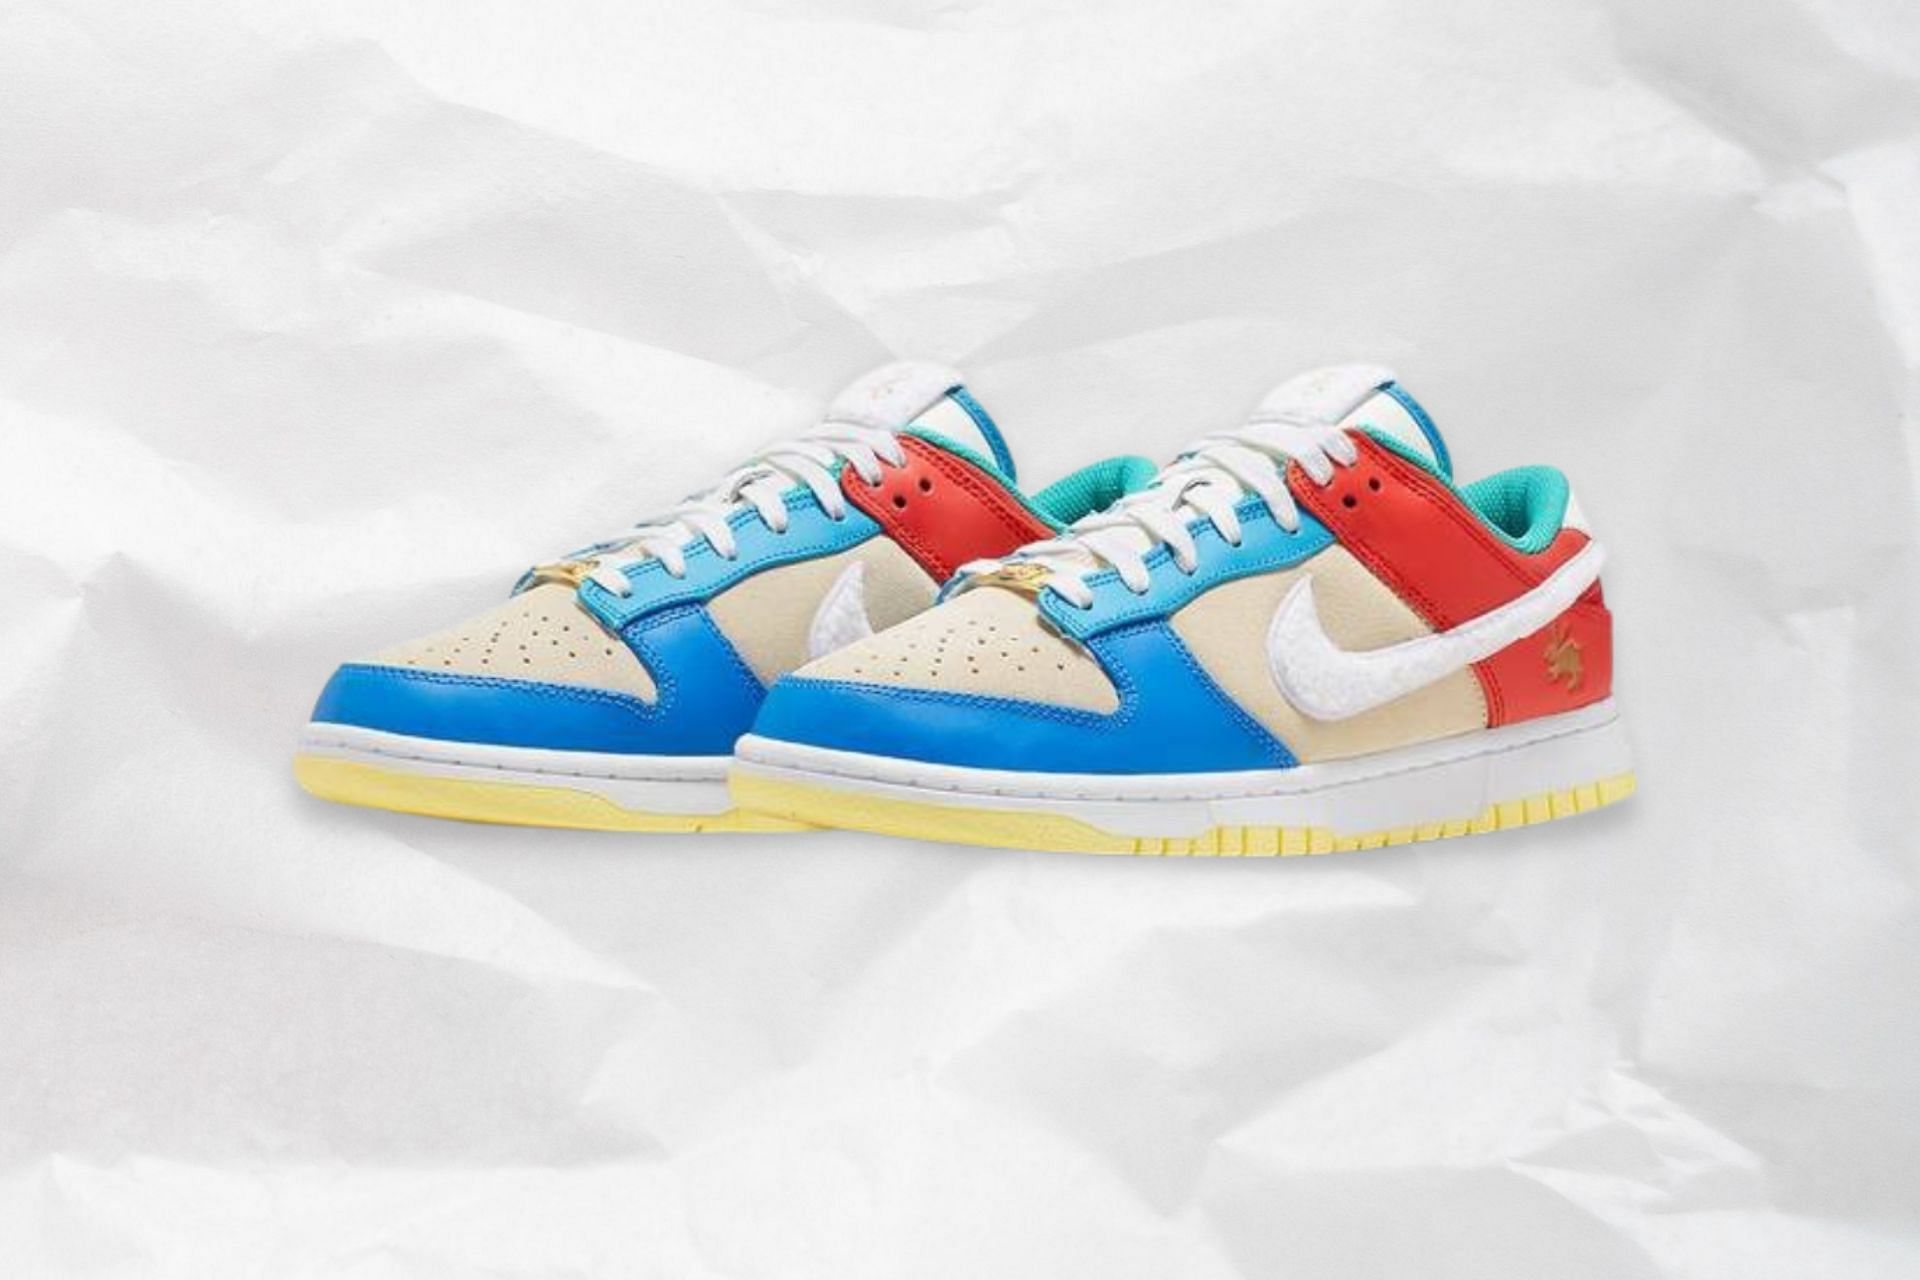 Nike Dunk Low Year of the Rabbit Multi-color shoes (Image via Nike)